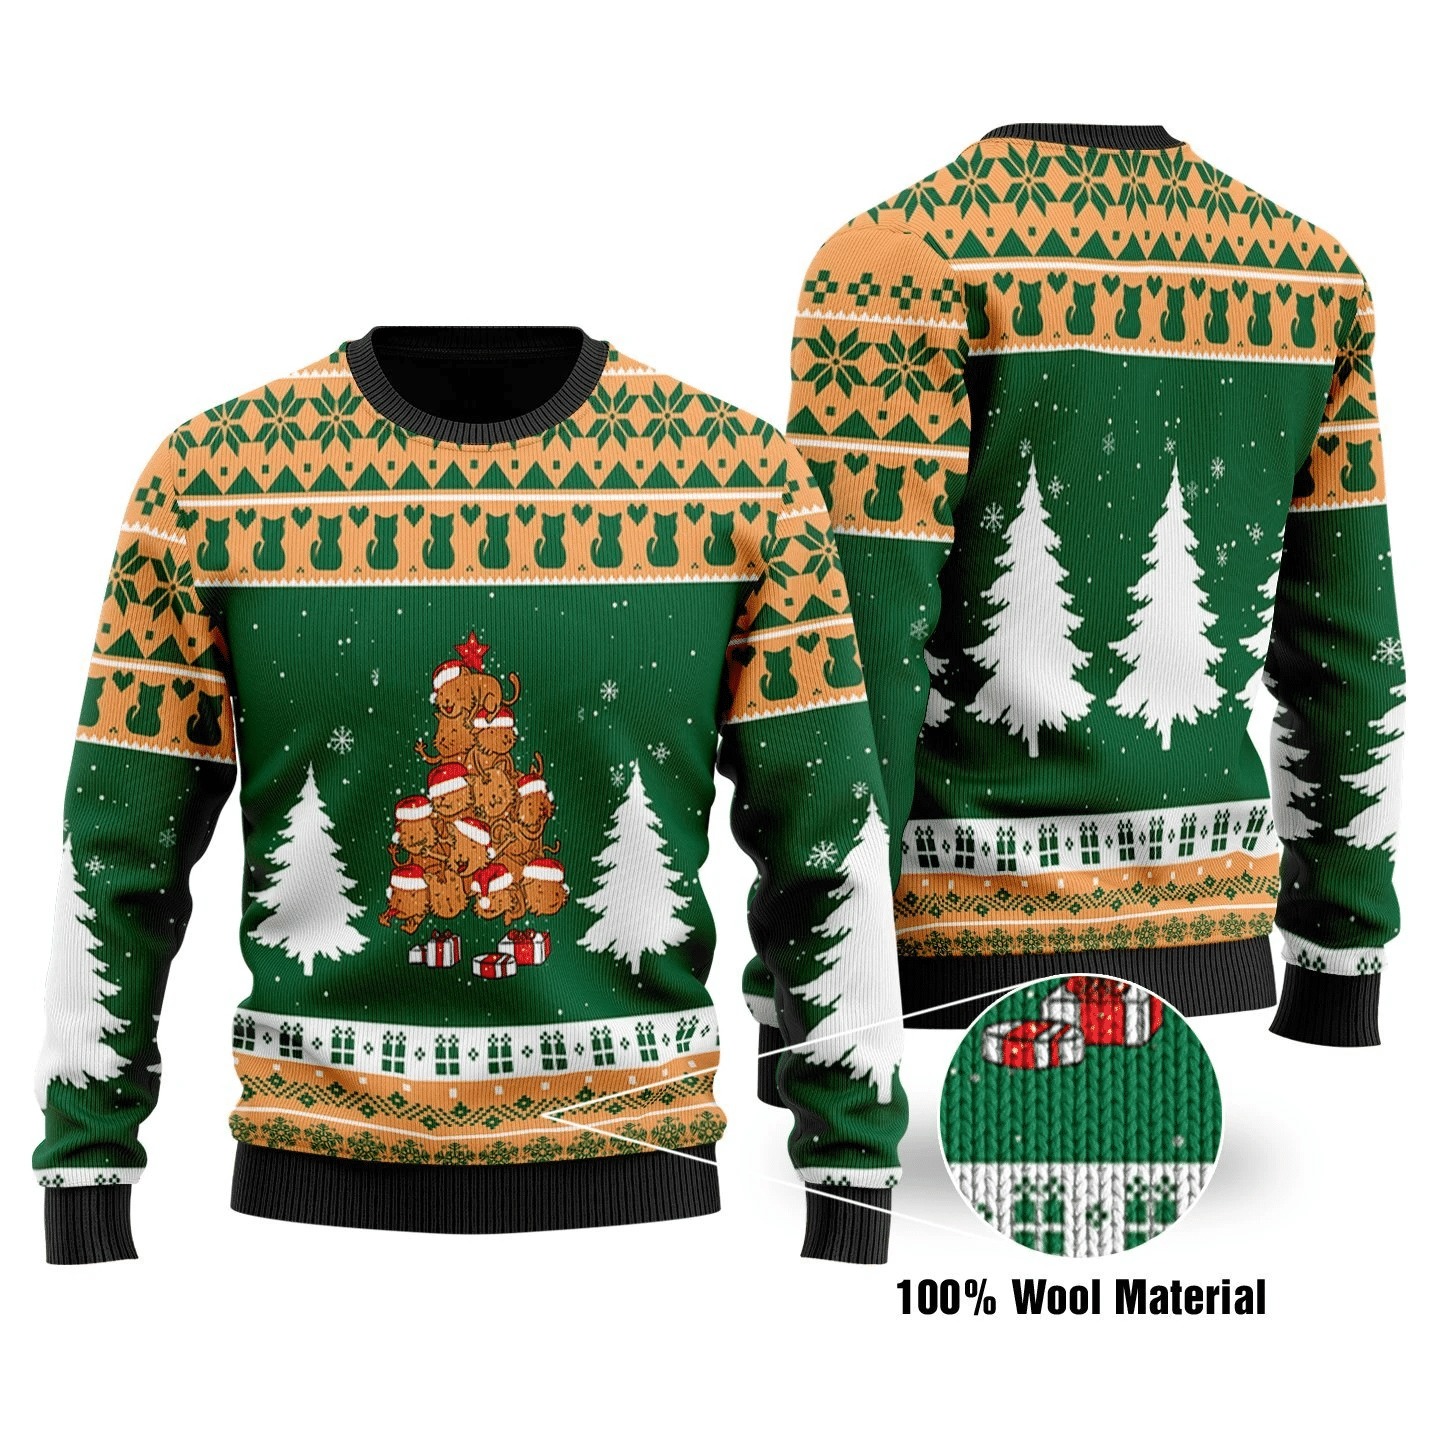 The Christmas Tree Cat Ugly Christmas Sweater